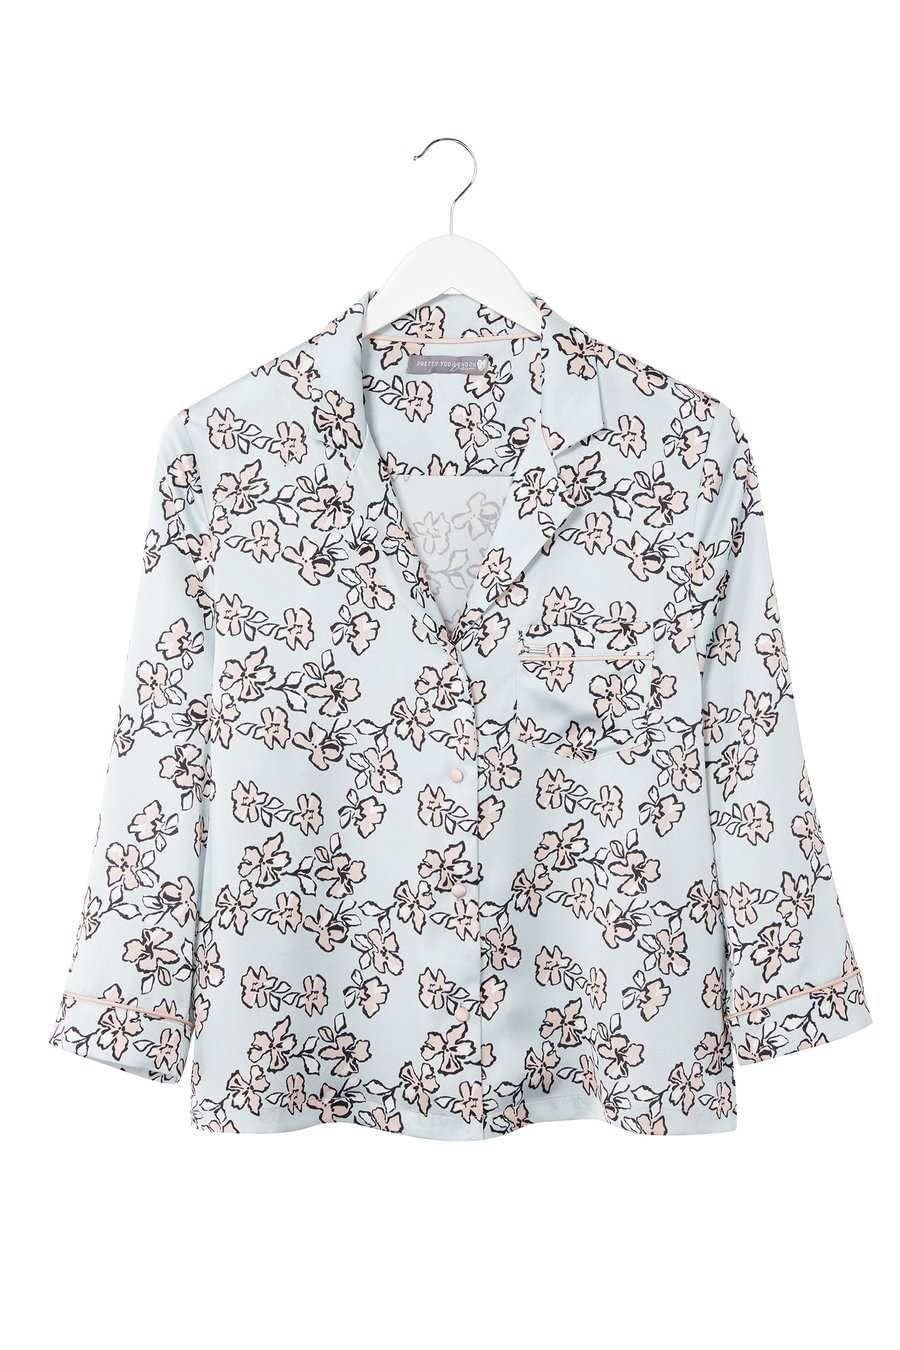 Mix and Match Floral Shirt in Duck Egg Blue